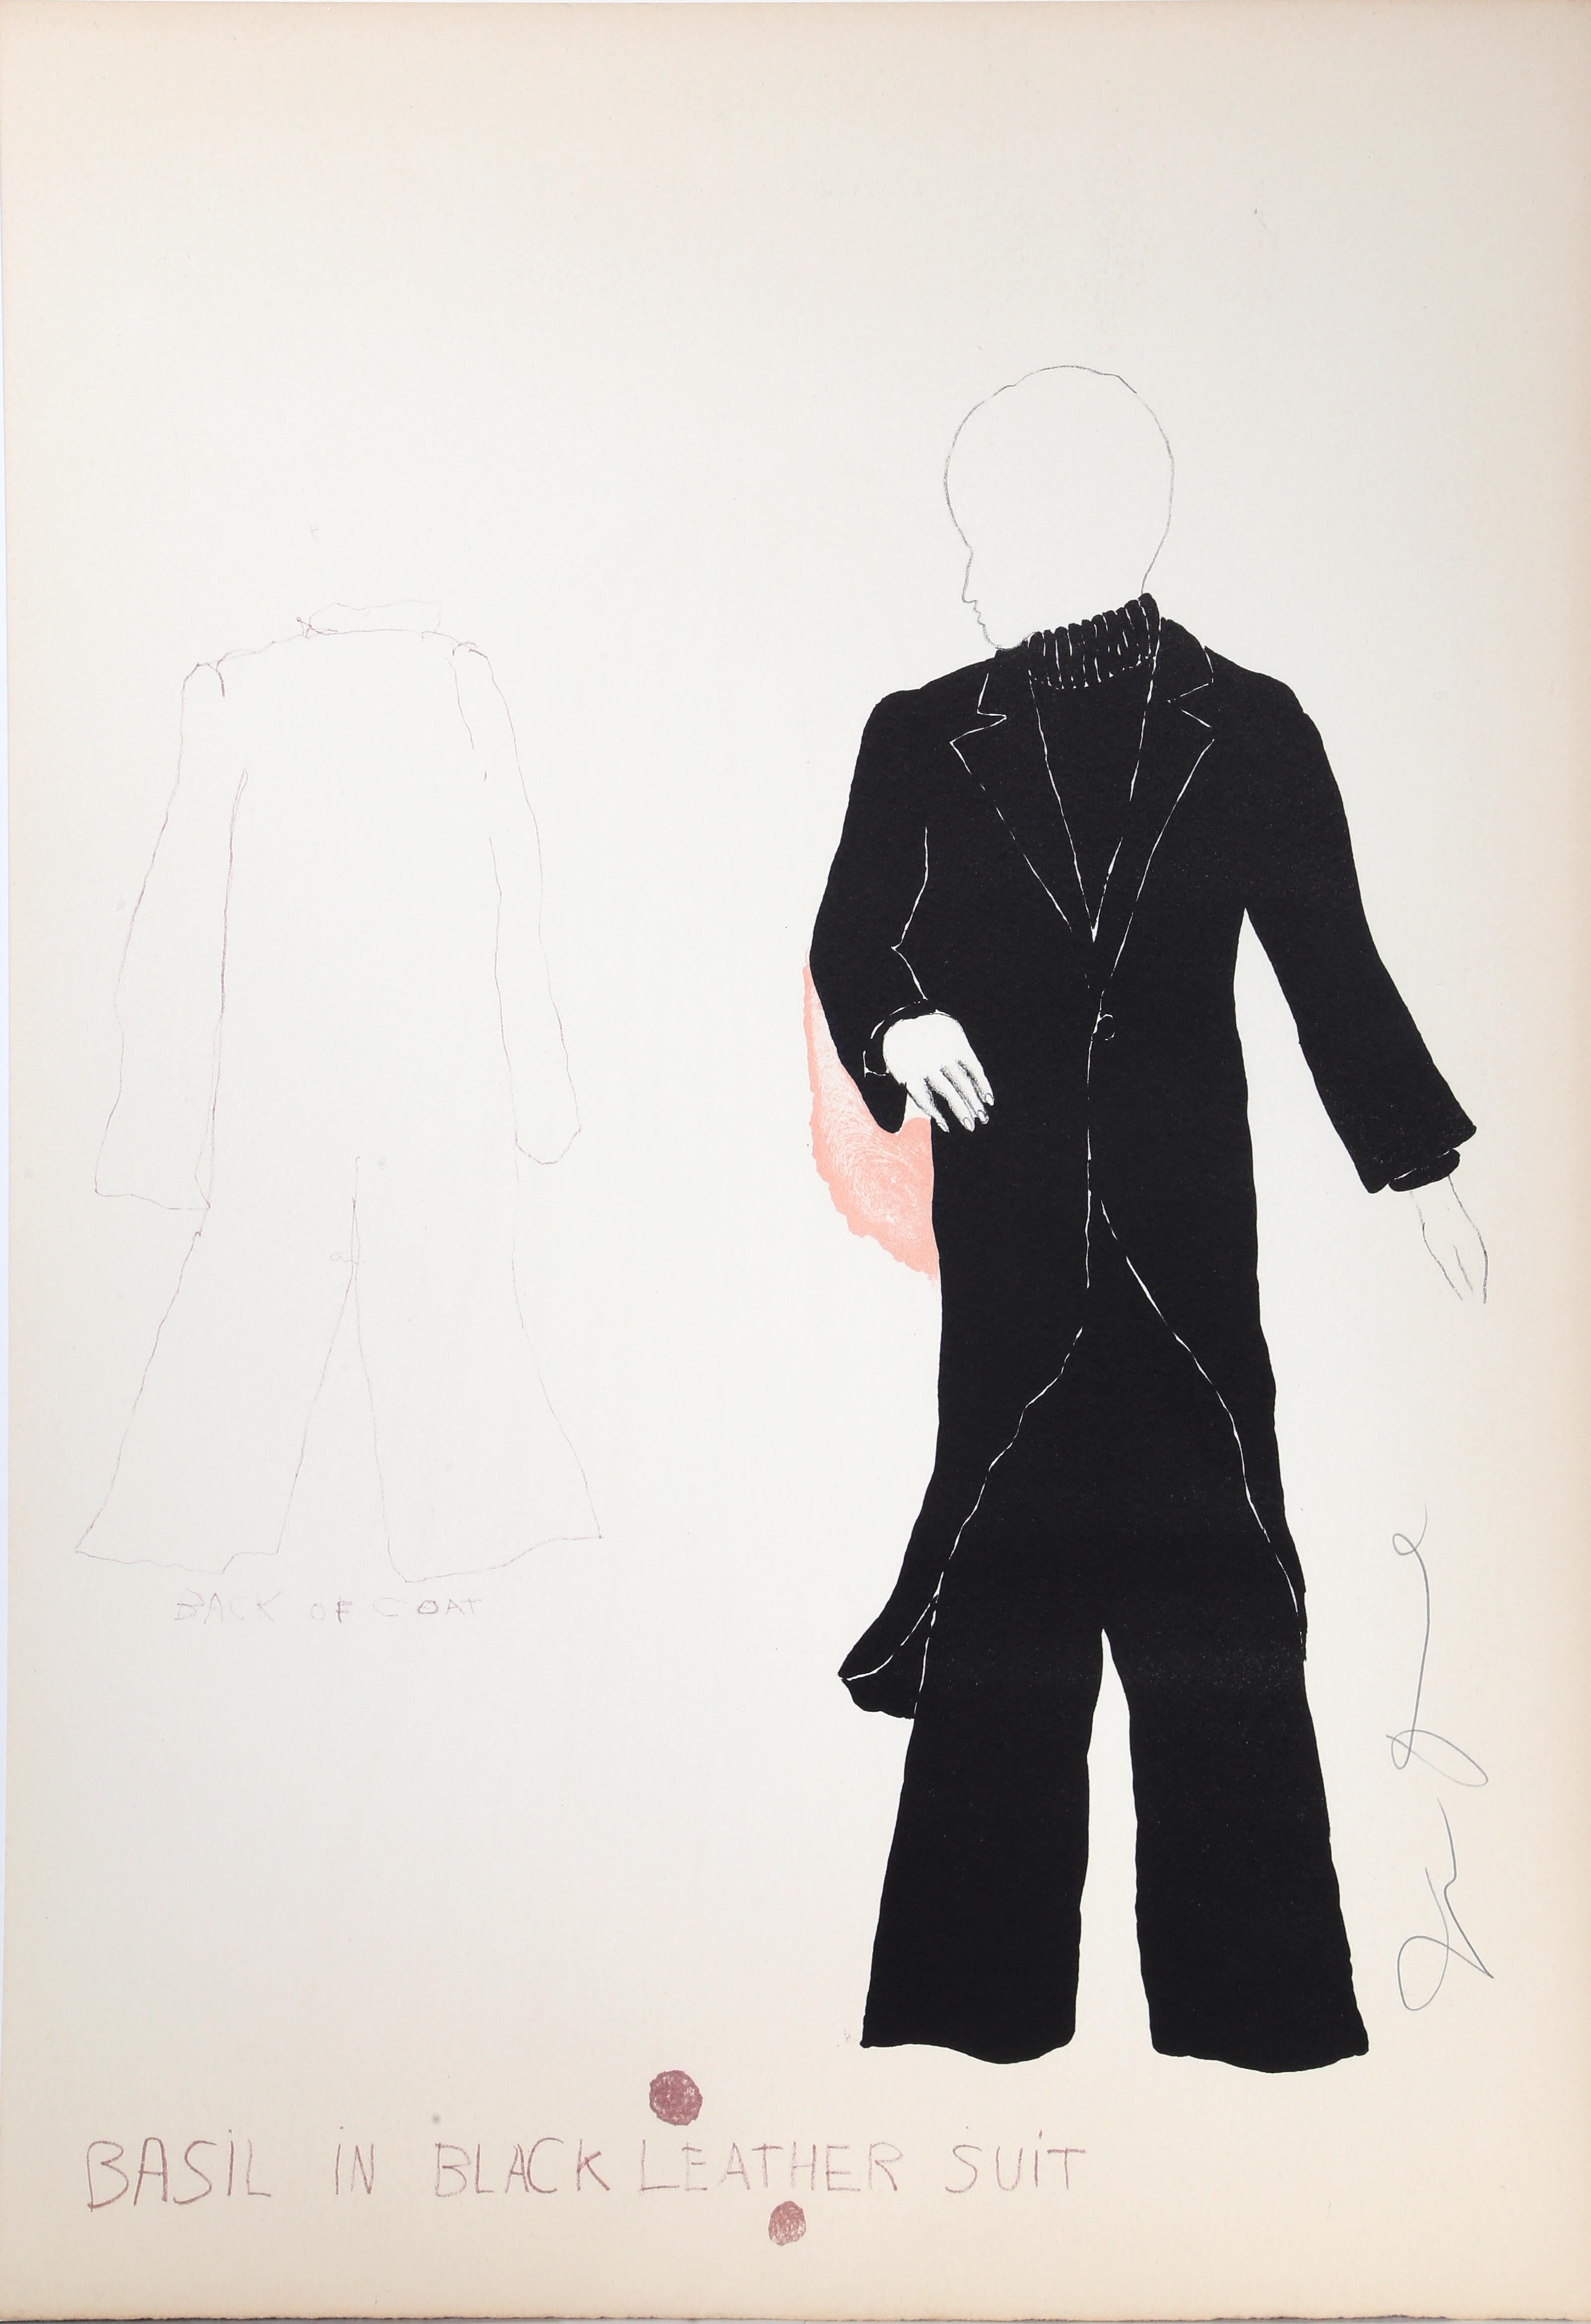 A lithograph by Jim Dine depicting a figure standing off to one side, looking down. Below them, the text reads "Basil in black leather suit" in all capital letters. This print is signed in pencil by the artist.

Basil in Black Leather Suit
Jim Dine,